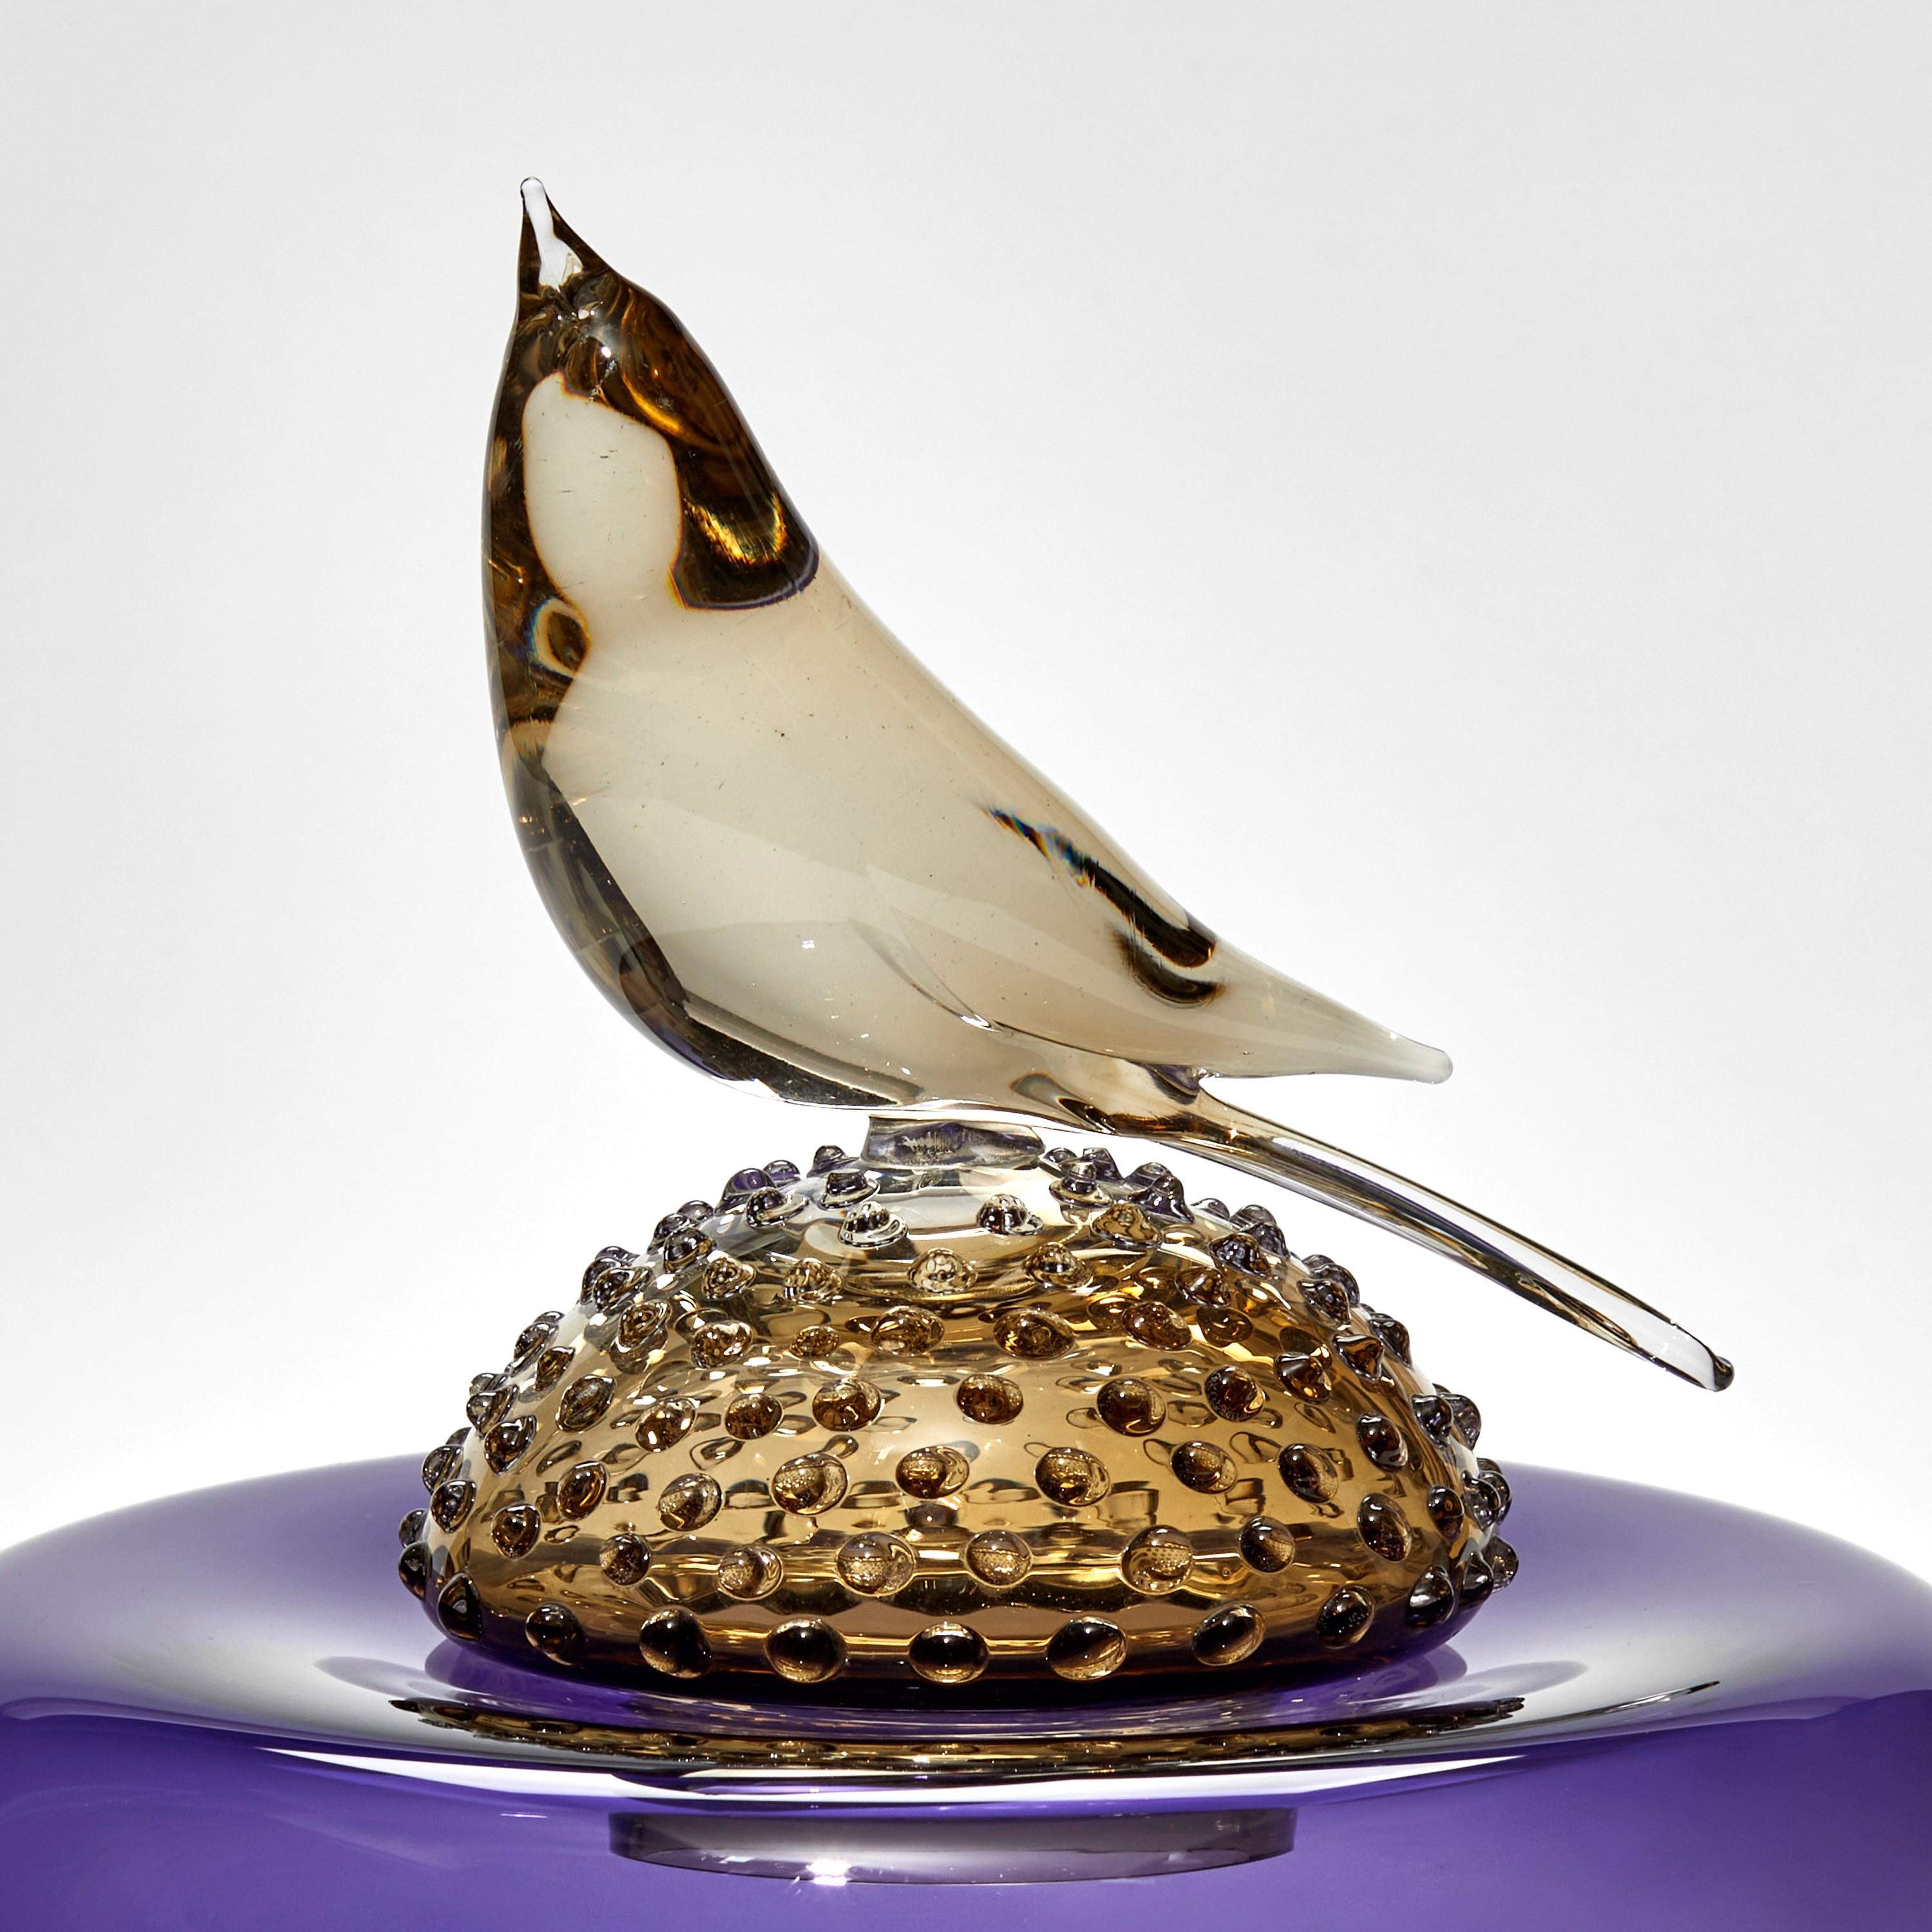 Organic Modern All About Birds IV, a Purple Glass Vase with Perched Bird by Julie Johnson